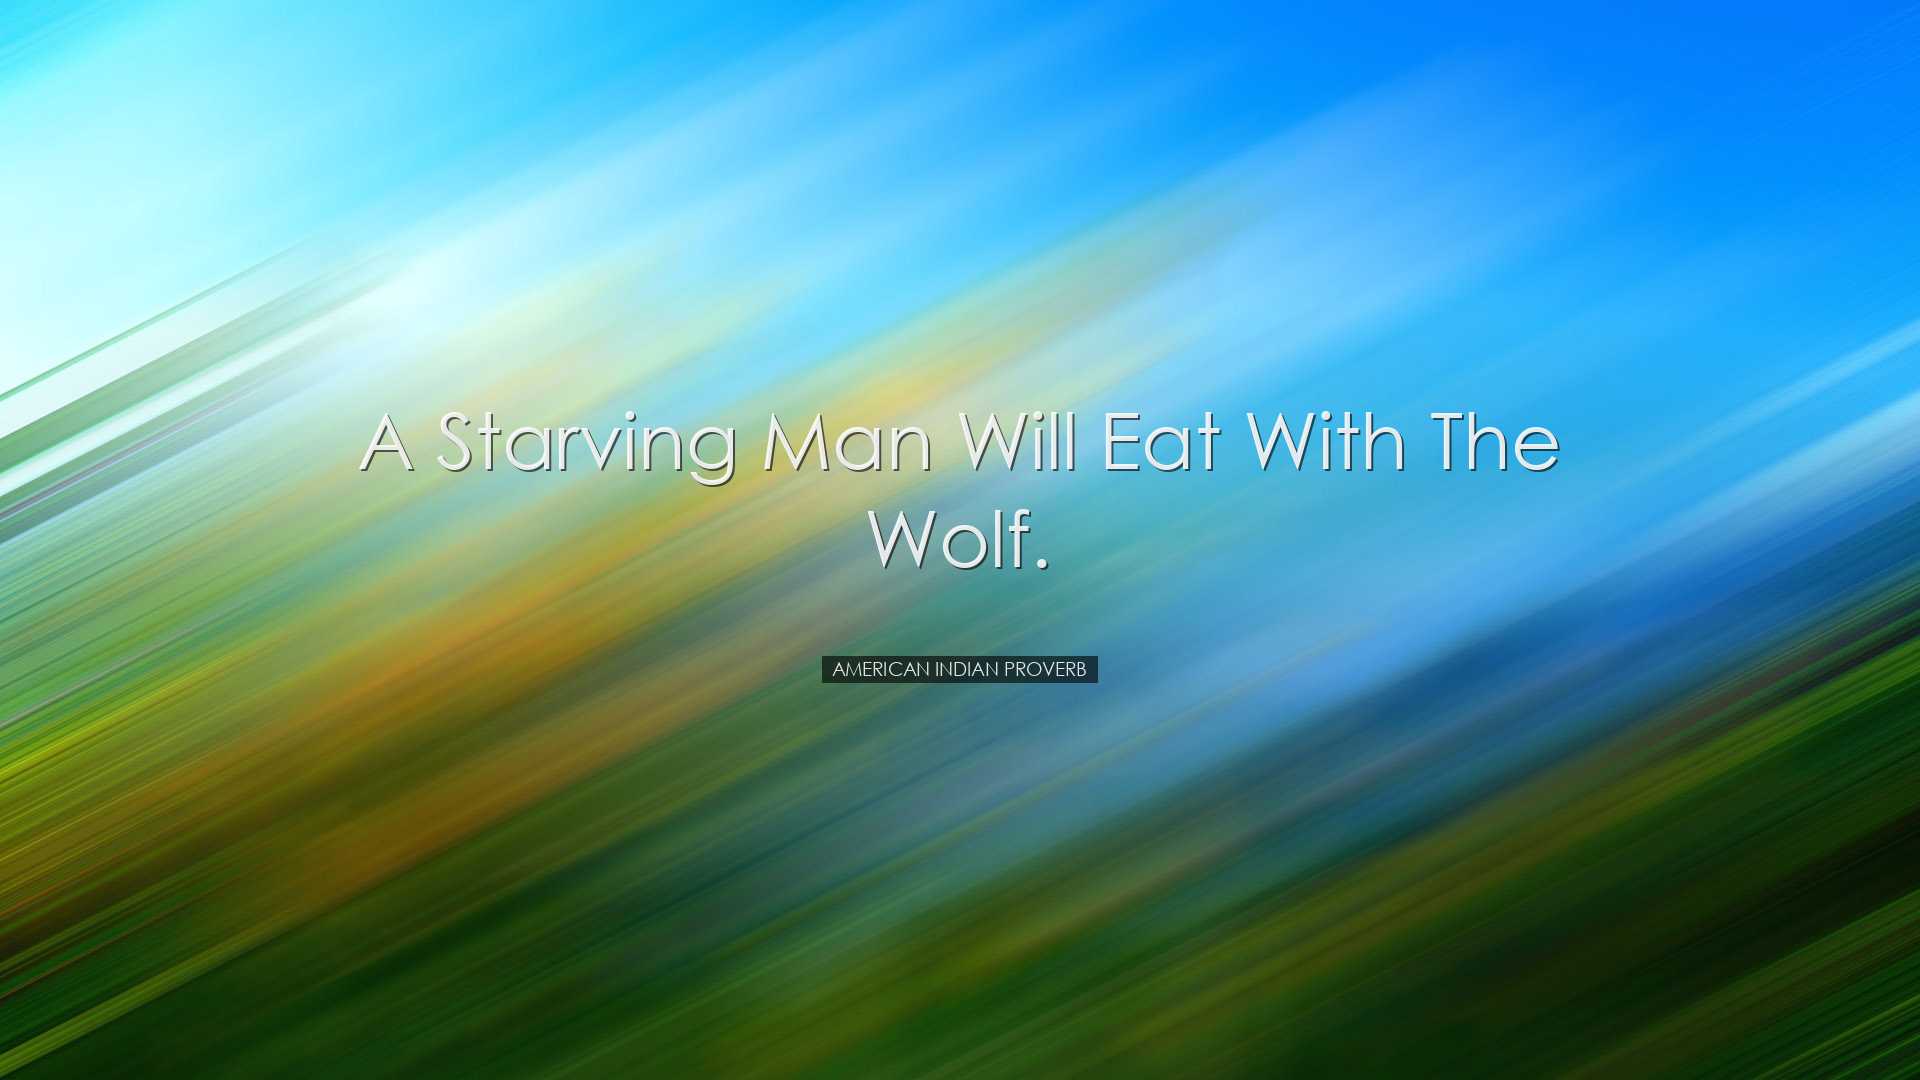 A starving man will eat with the wolf. - American Indian Proverb